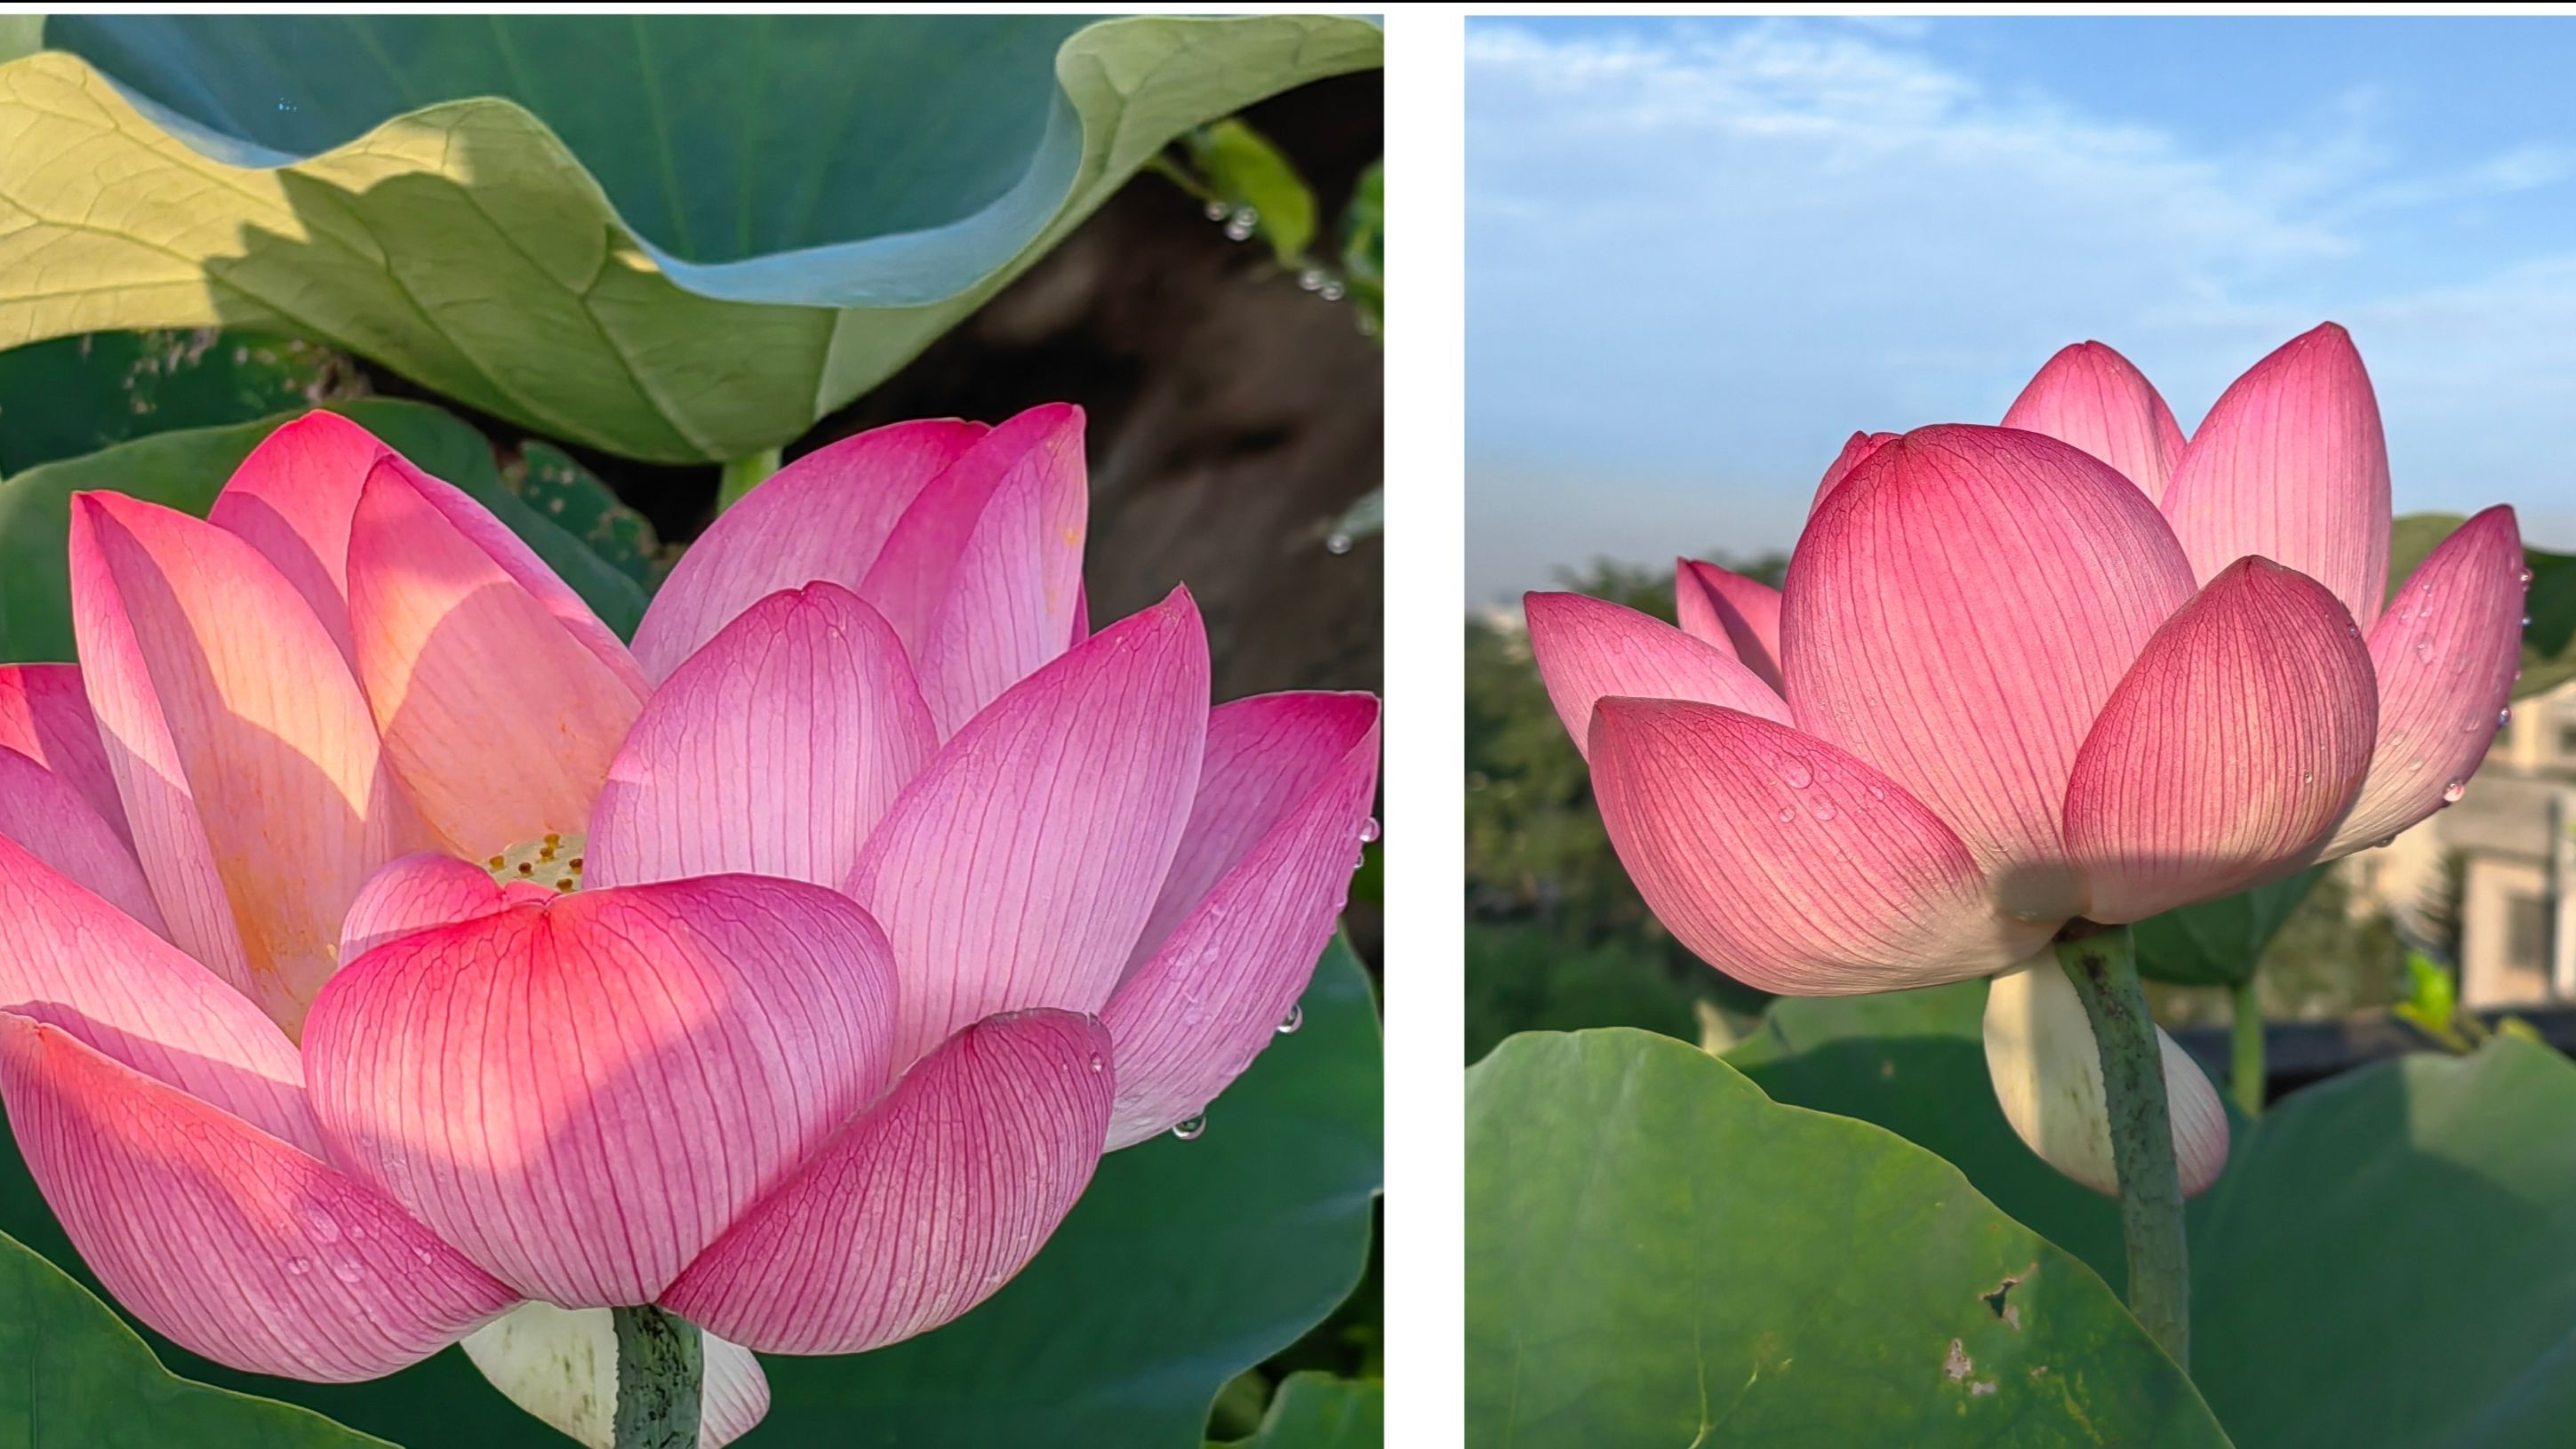 The lotus of my rooftop blooms after the rain